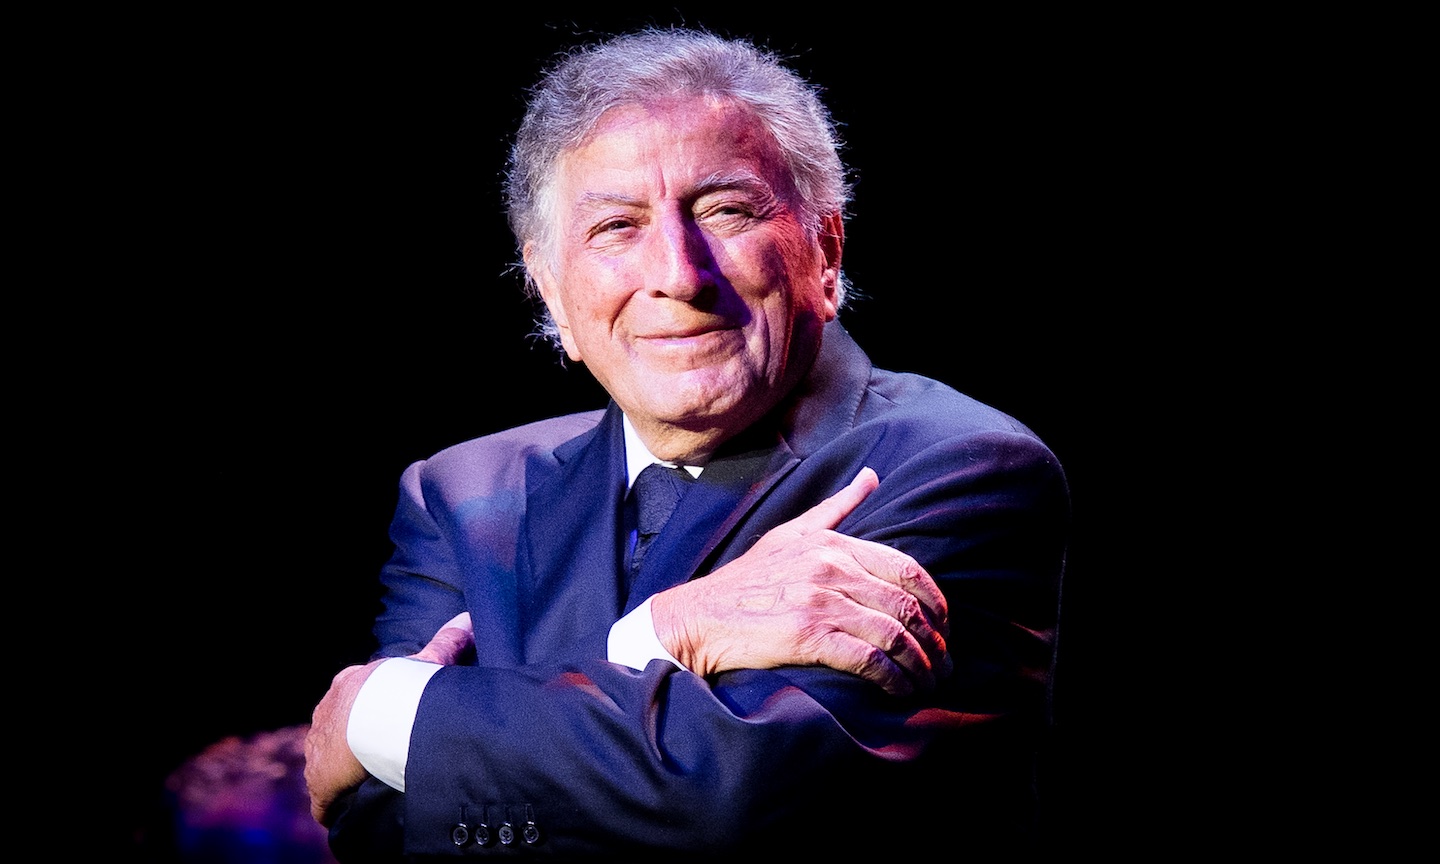 Tony Bennett - Rags to Riches - Reviews - Album of The Year